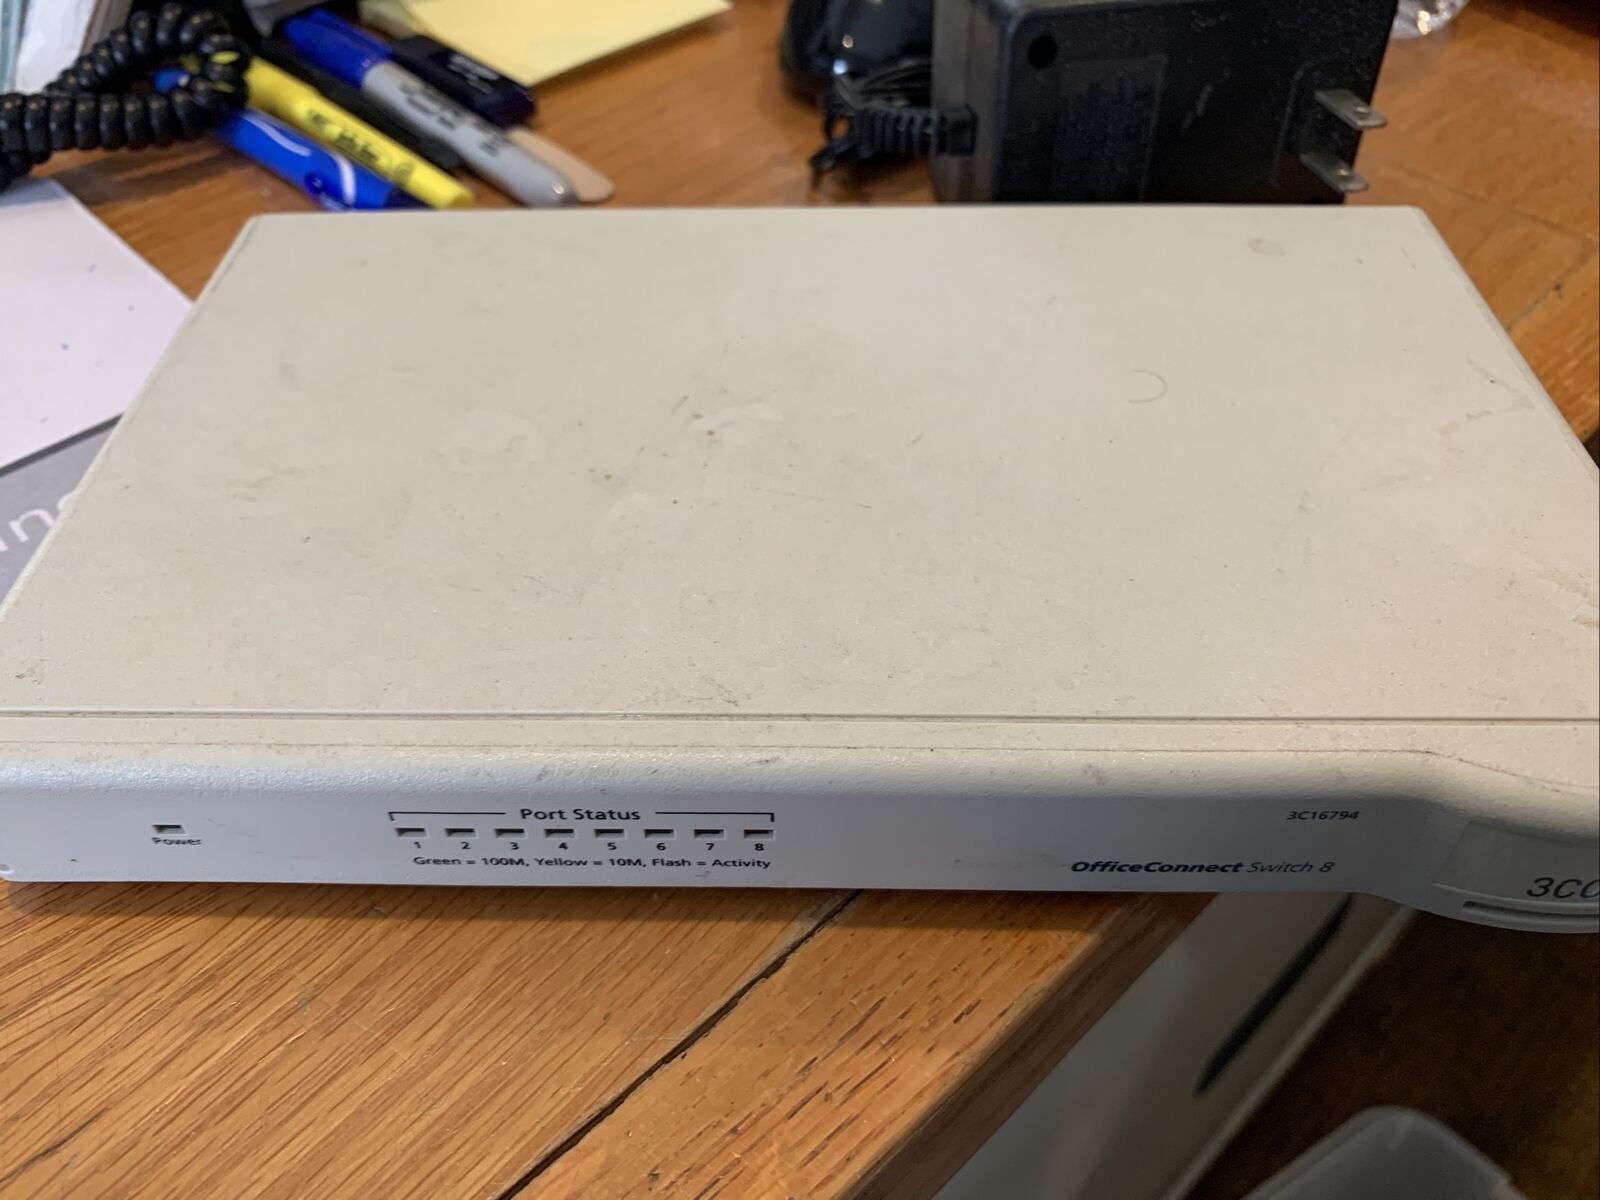 3COM 3C16794 Office Connect 8 Port Fast Ethernet Dual Speed Switch w/ Power